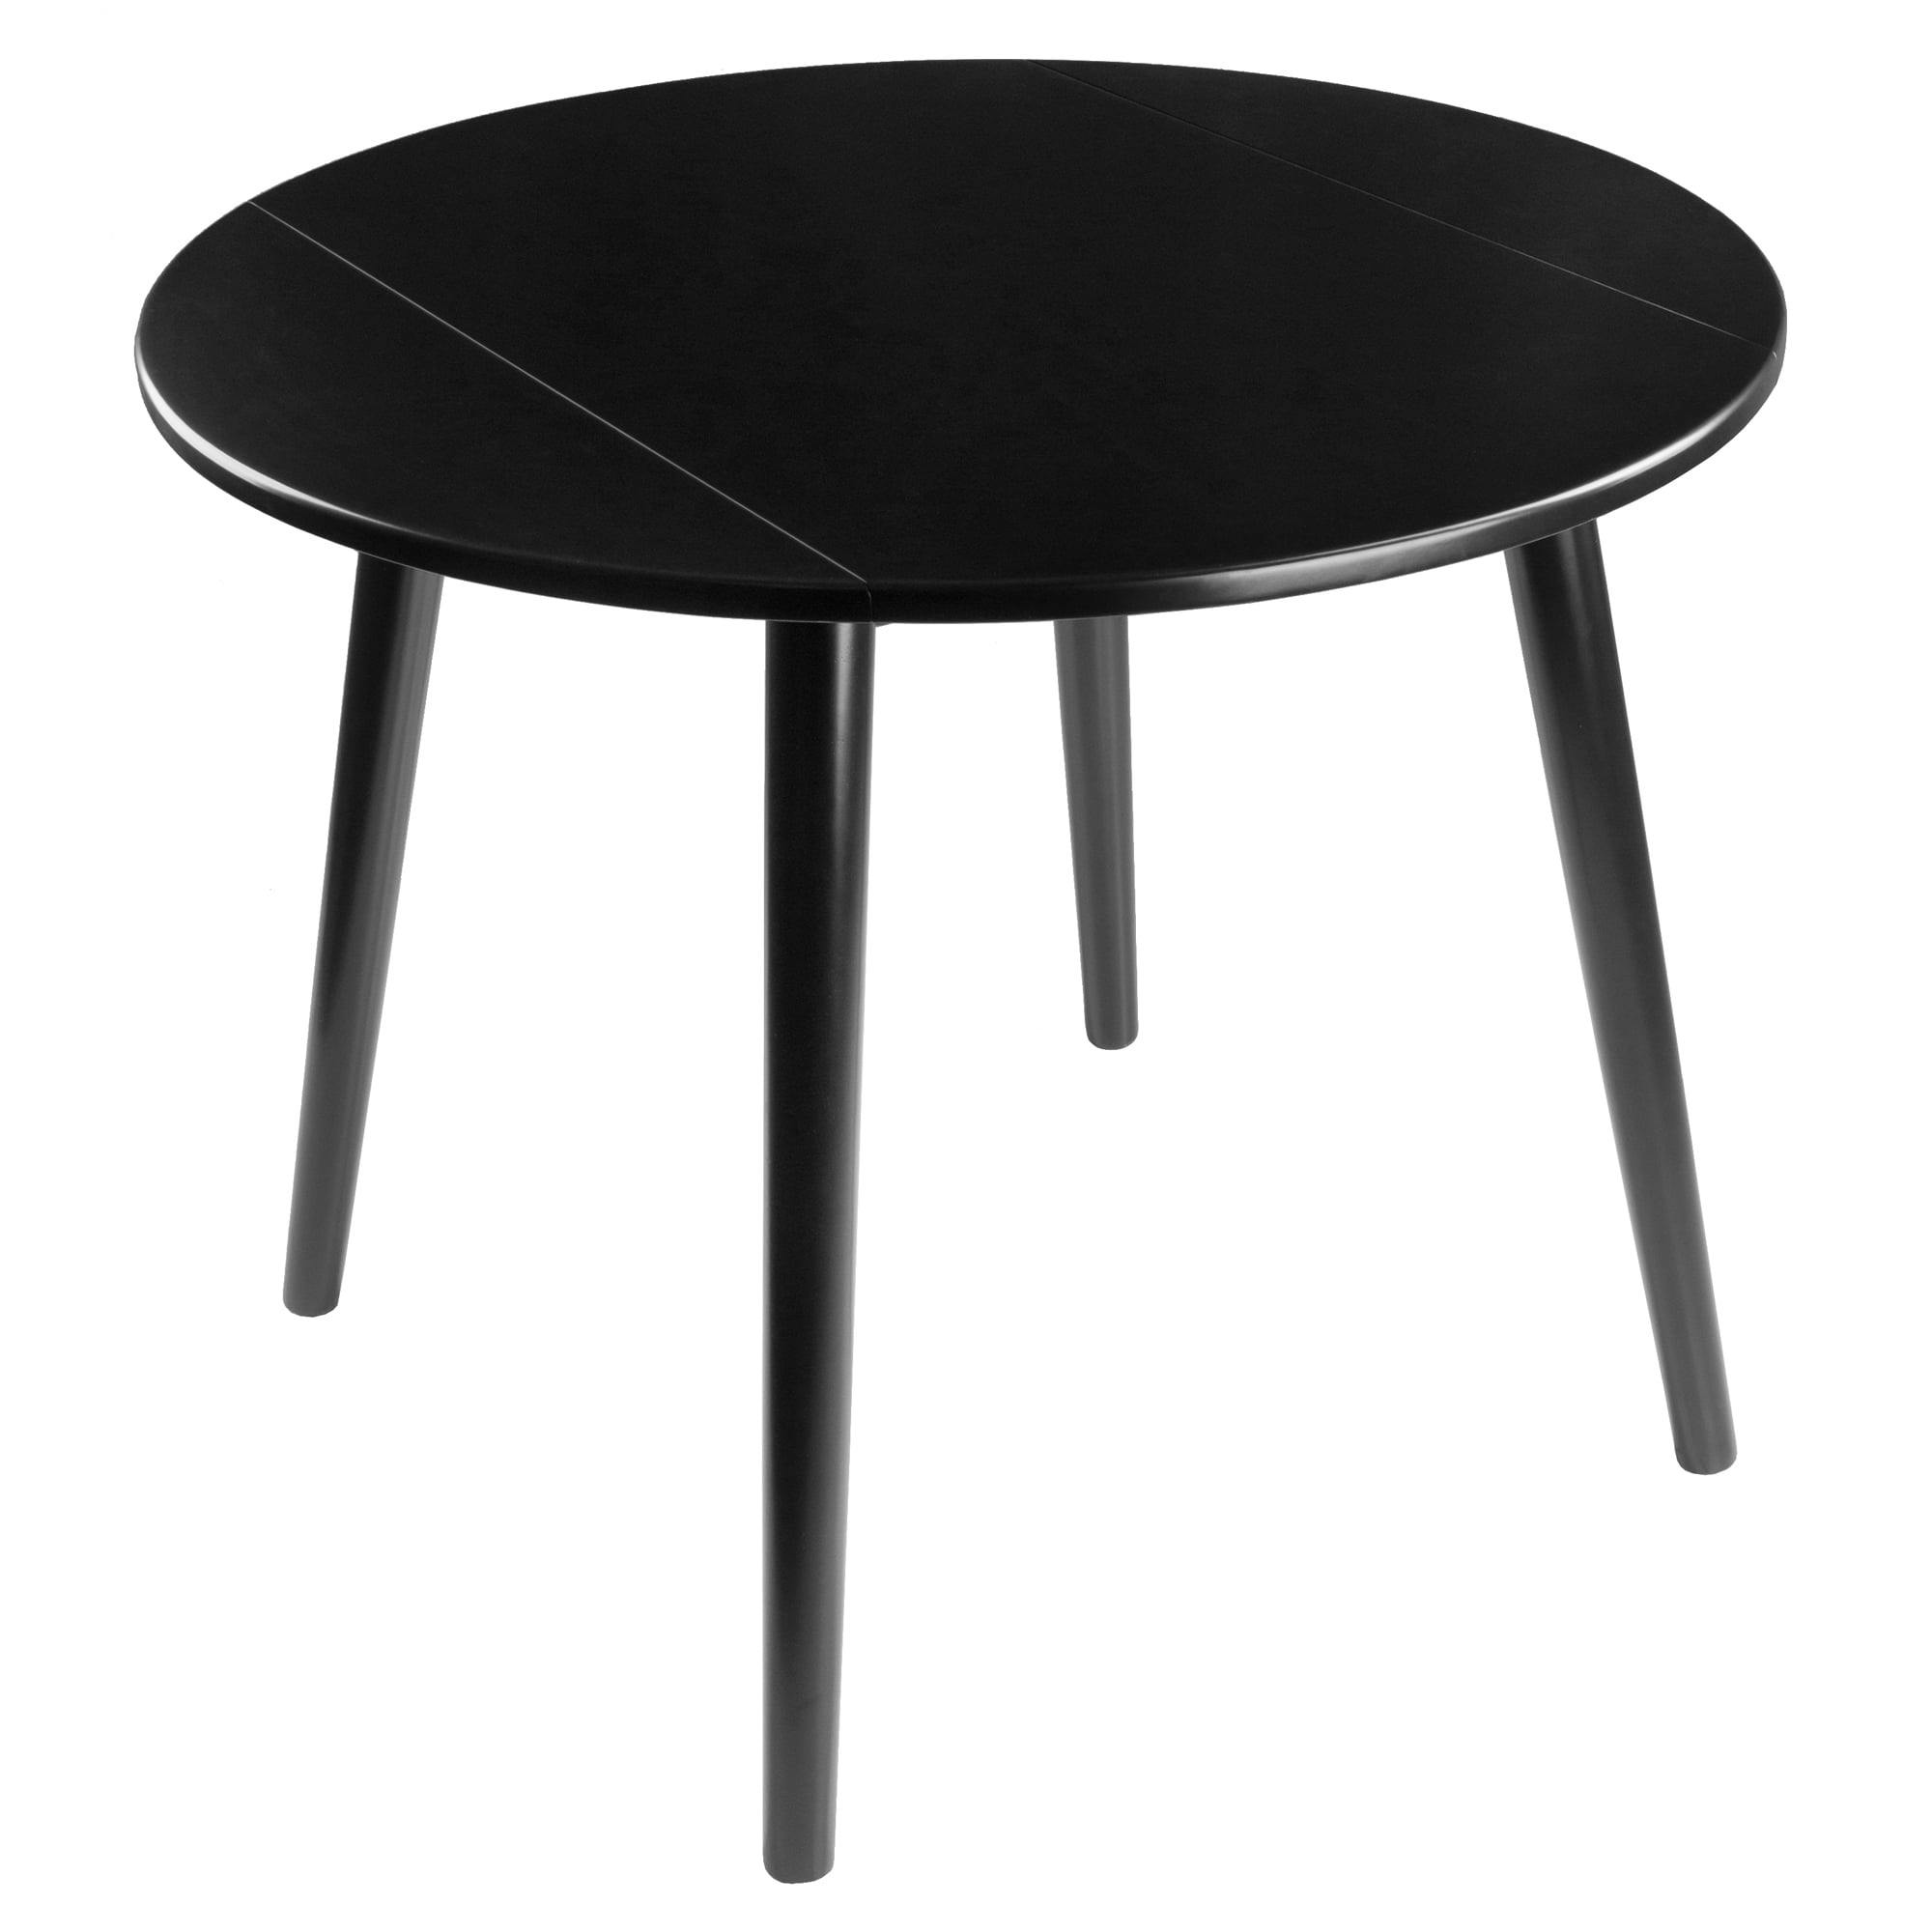 Mid-Century Modern Moreno Black Wood 36" Round Extendable Dining Table